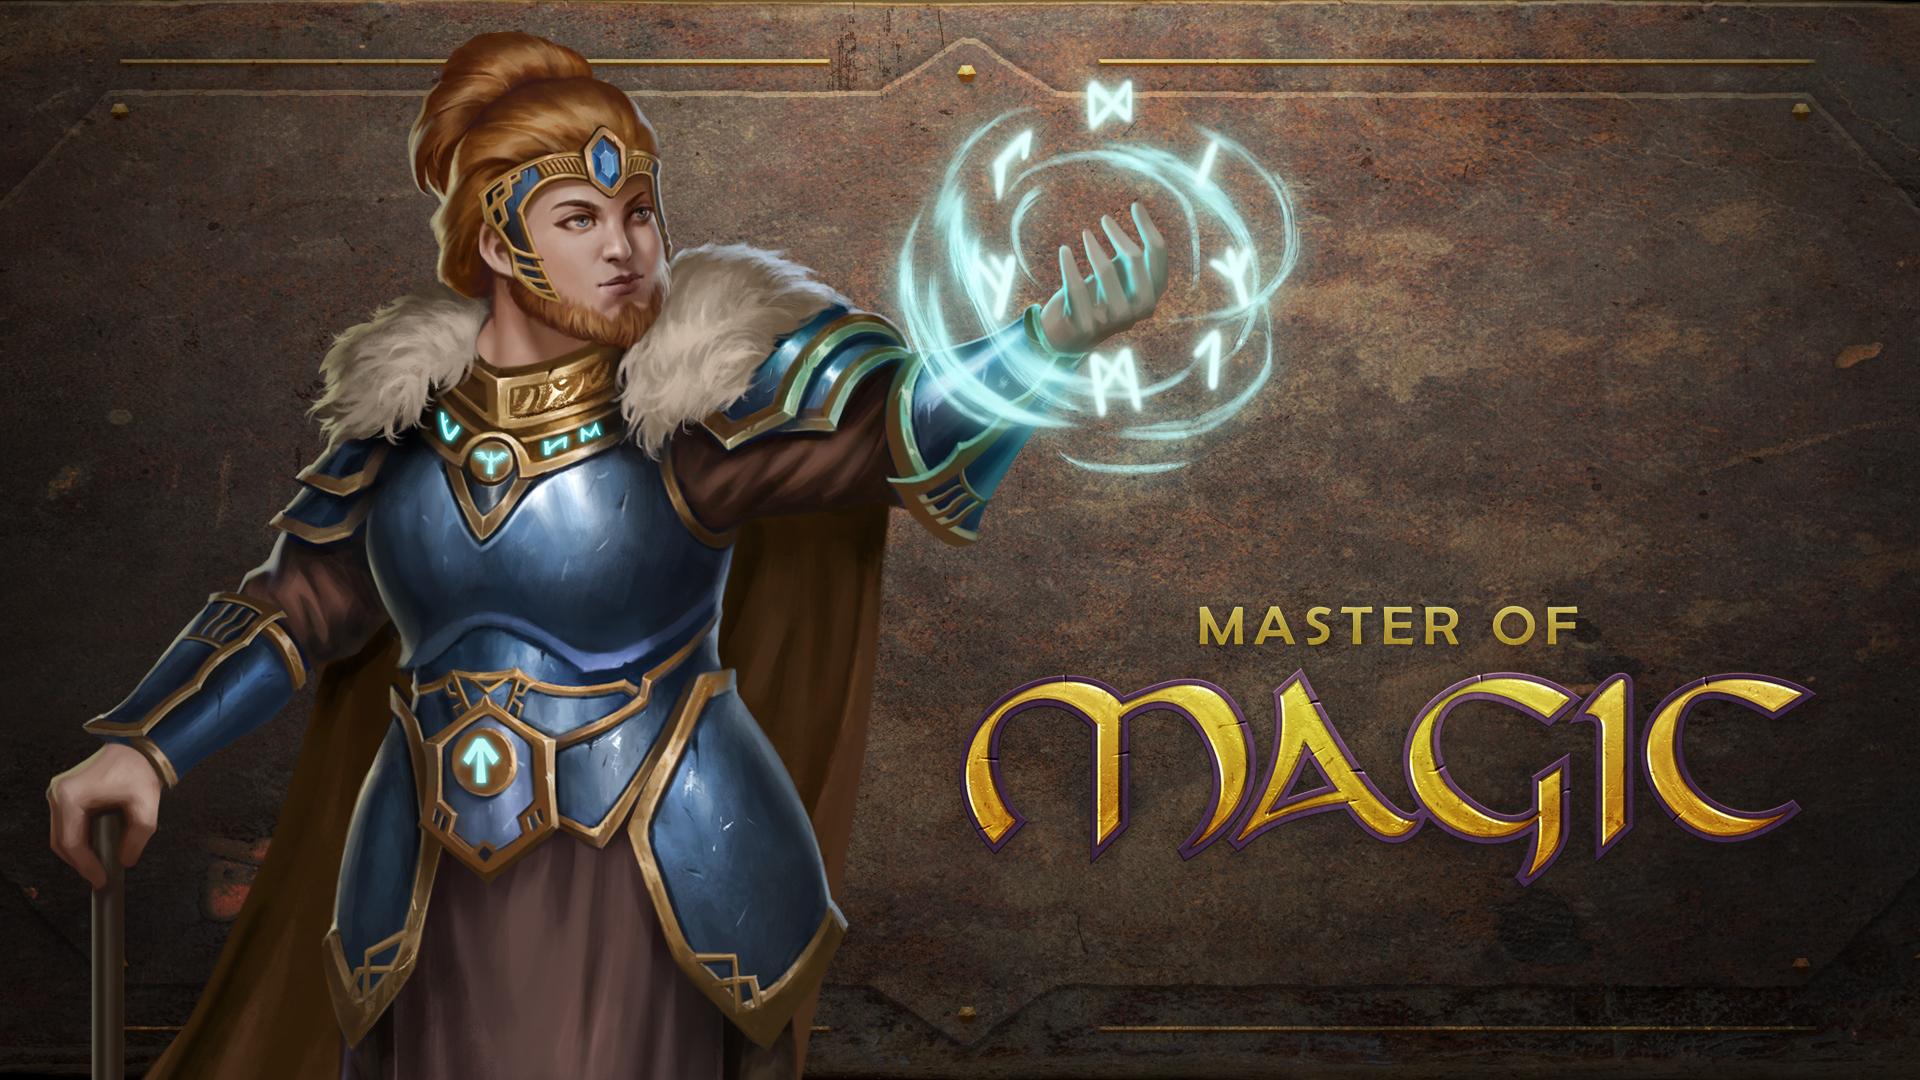 MASTER OF MAGIC: RISE OF THE SOULTRAPPED